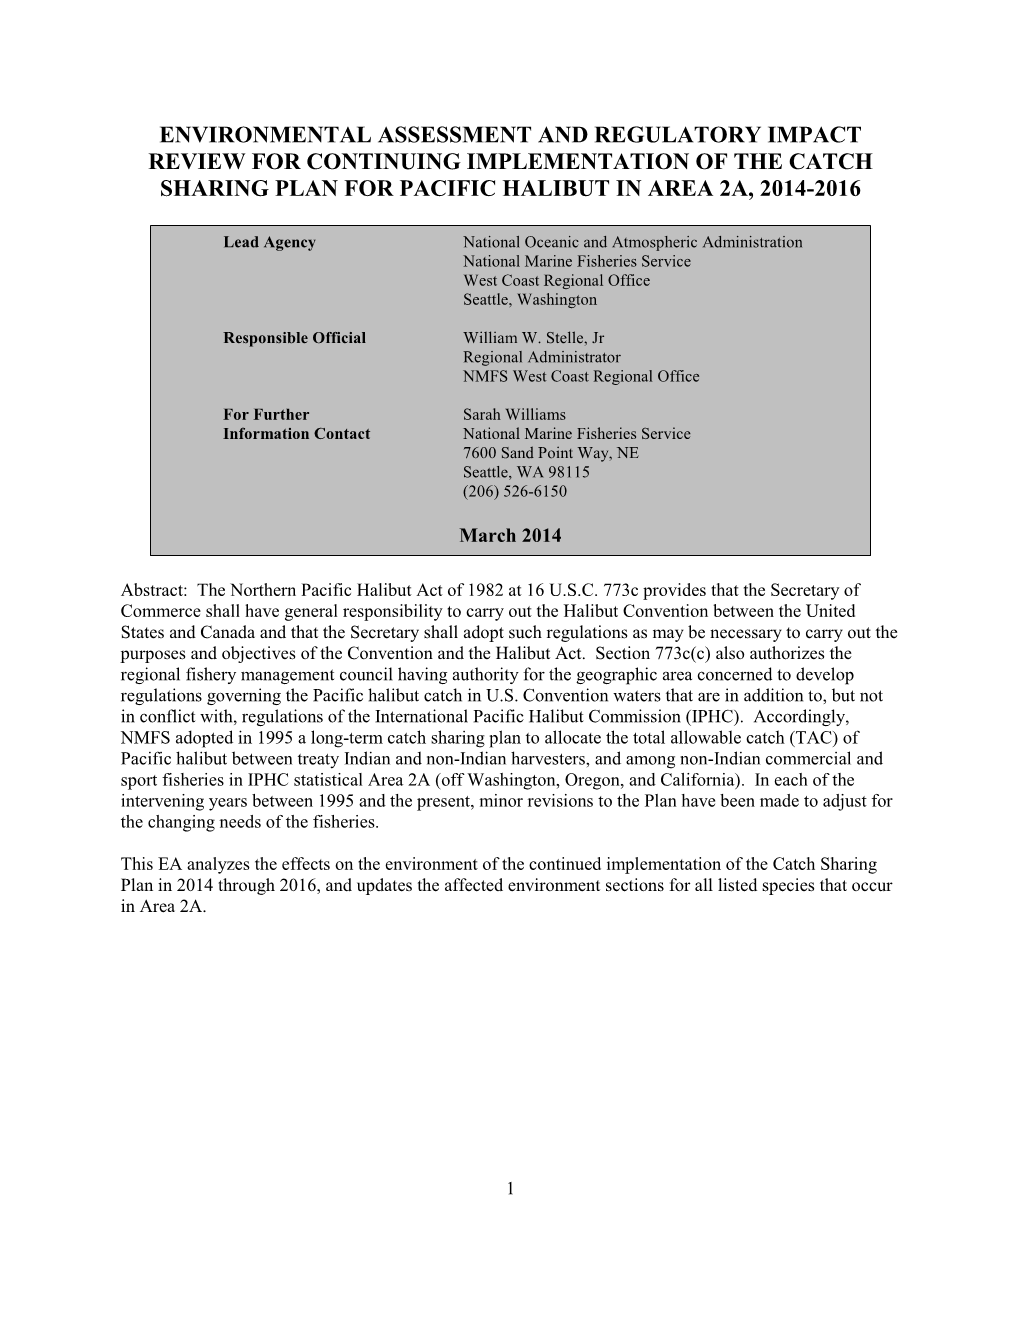 Environmental Assessment and Regulatory Impact Review for Continuing Implementation of the Catch Sharing Plan for Pacific Halibut in Area 2A, 2014-2016